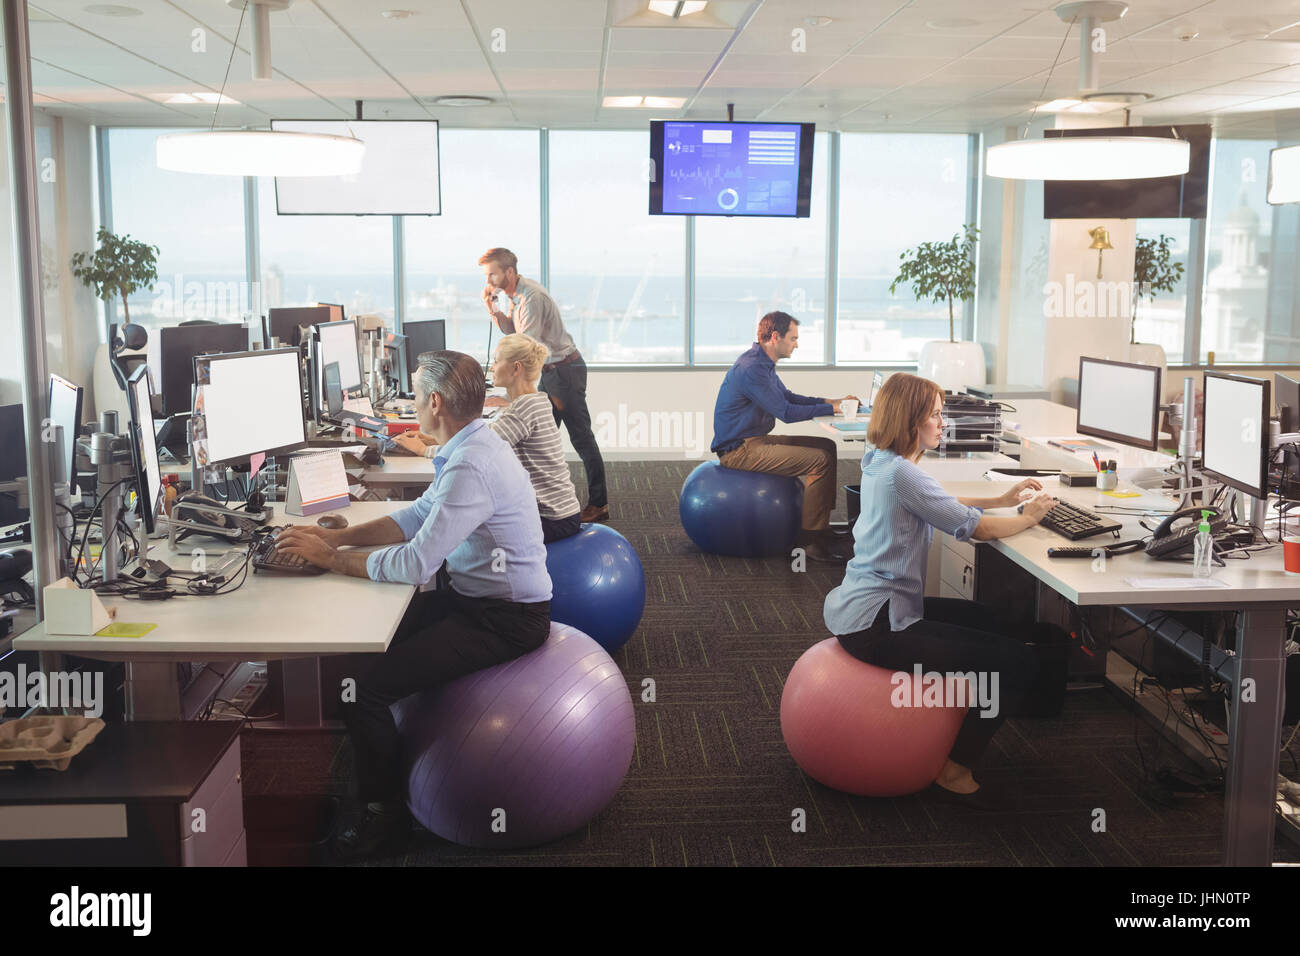 Business People Working At Desk While Sitting On Exercise Balls In